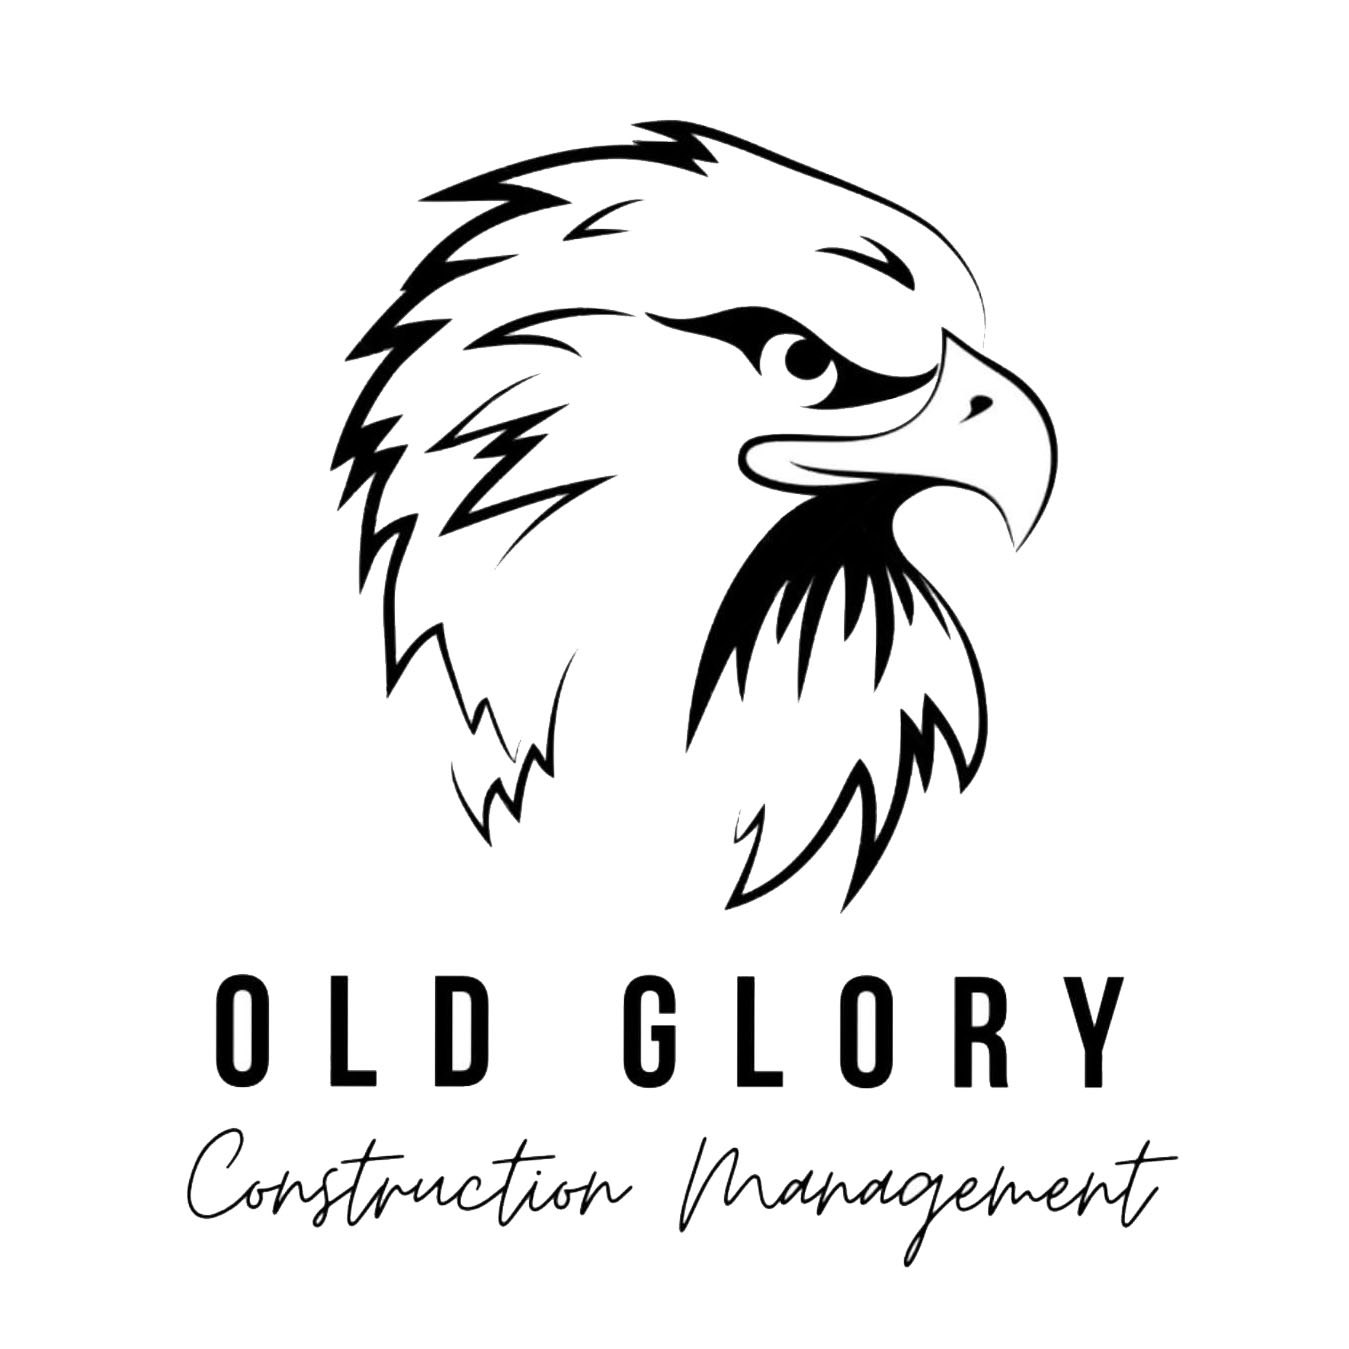 Old Glory Construction Management